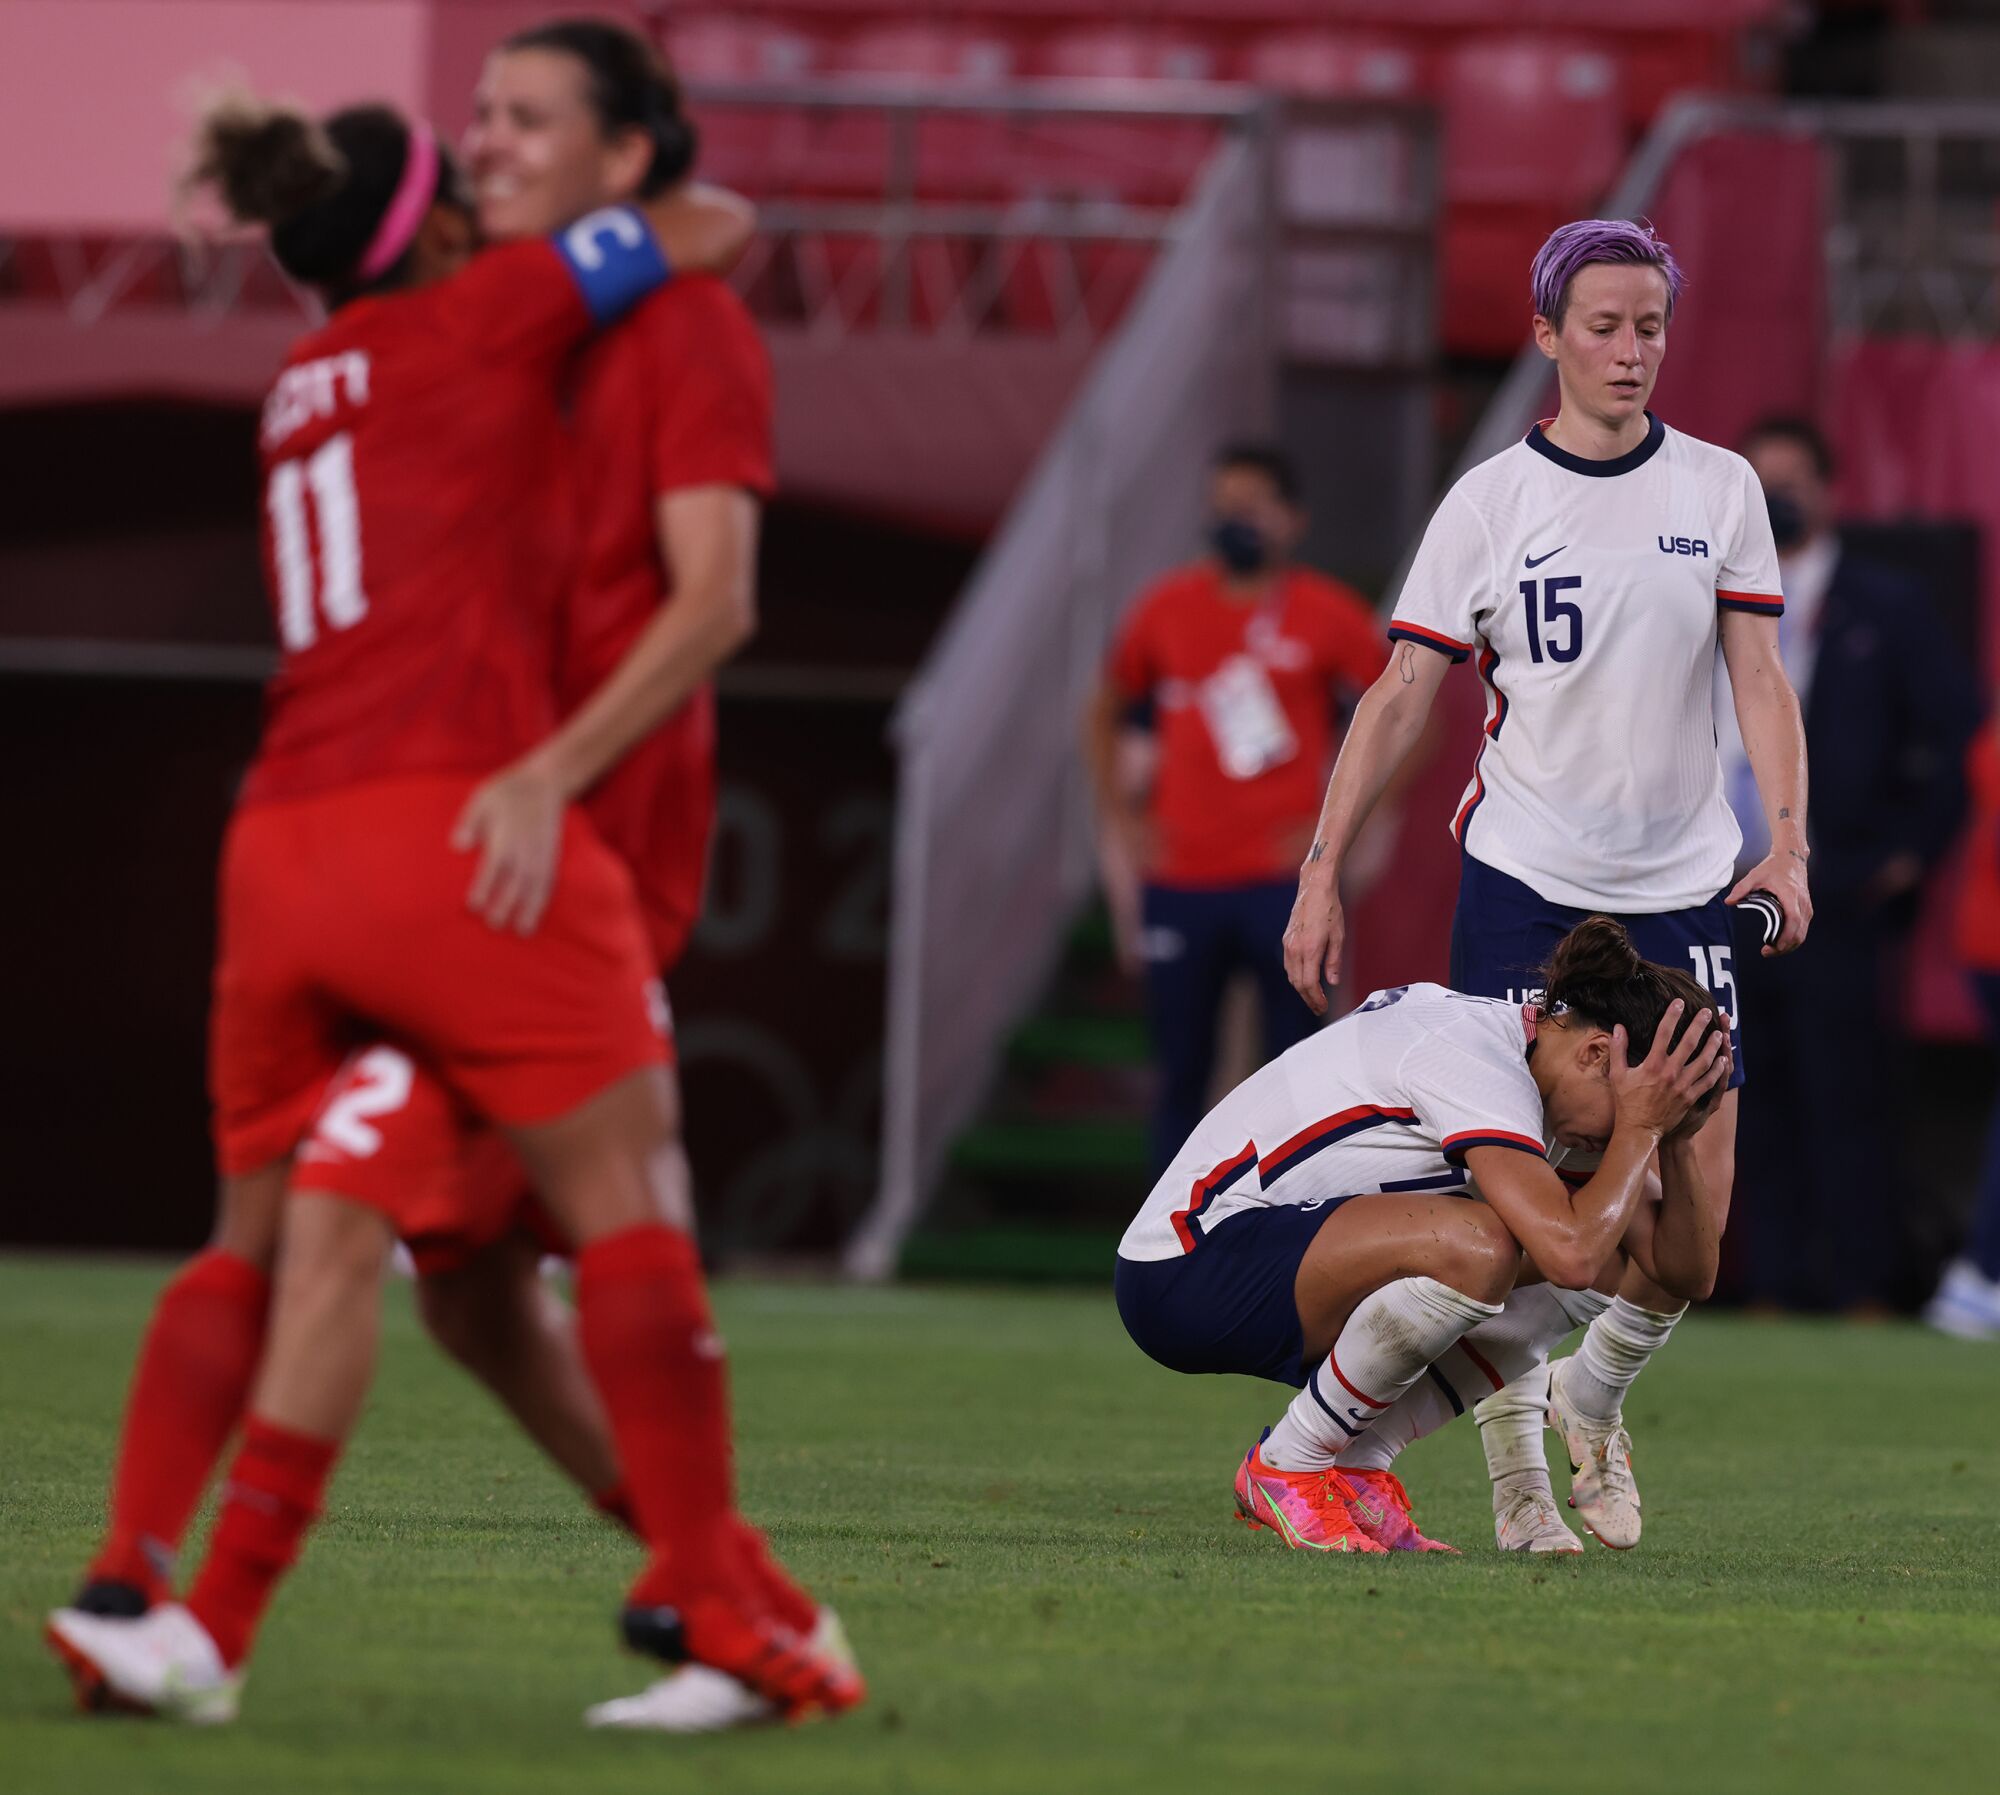 A despondent Team USA forward Carli Lloyd (10) crouches on the field as teammate Megan Rapinoe approaches to console her.